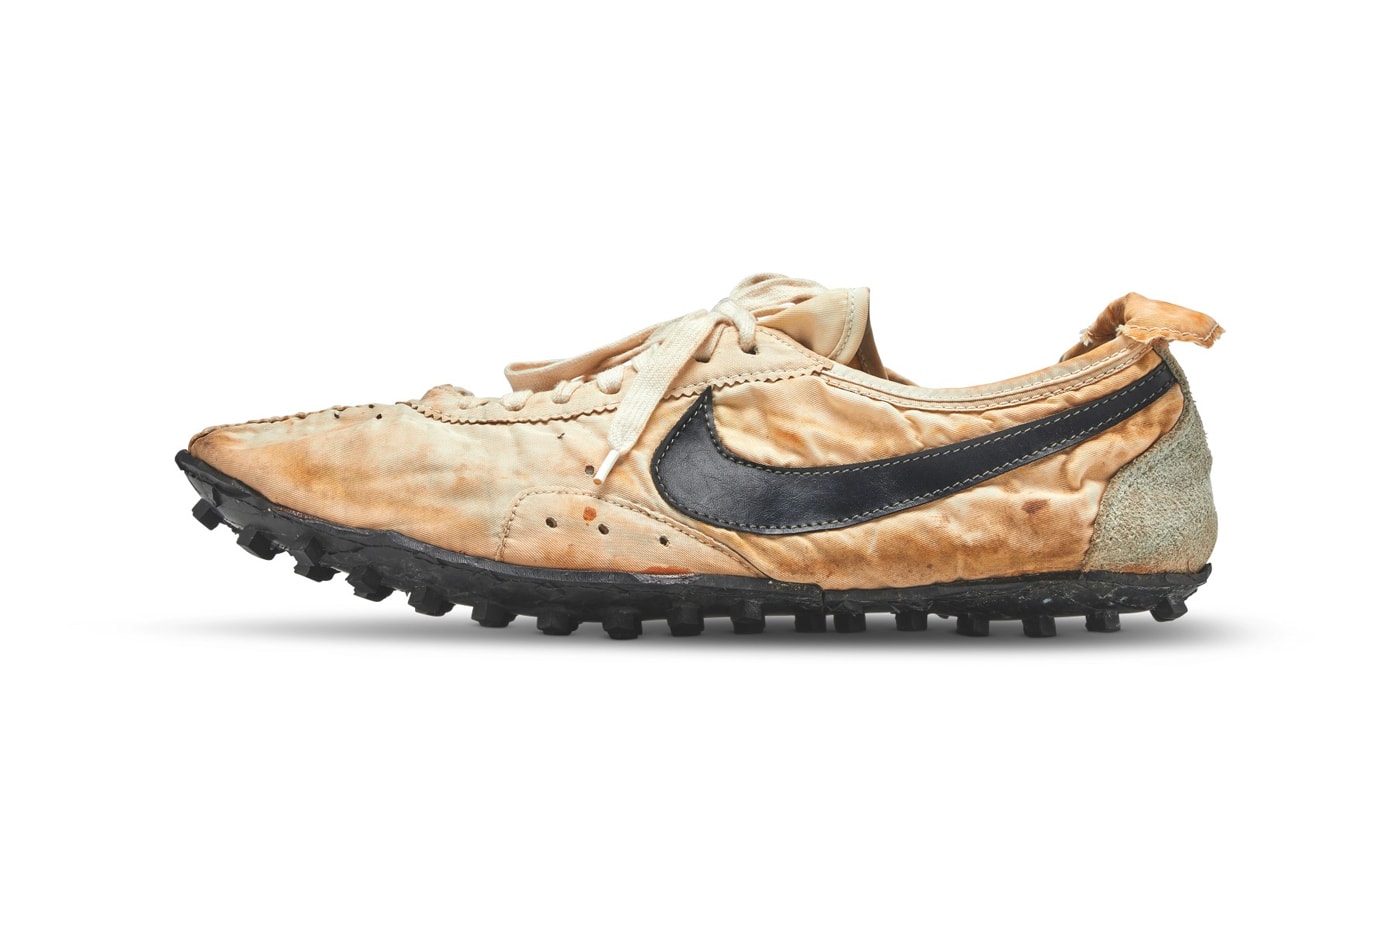 Nike Moon Shoe Breaks World Auction Record Sotheby's miles nadal